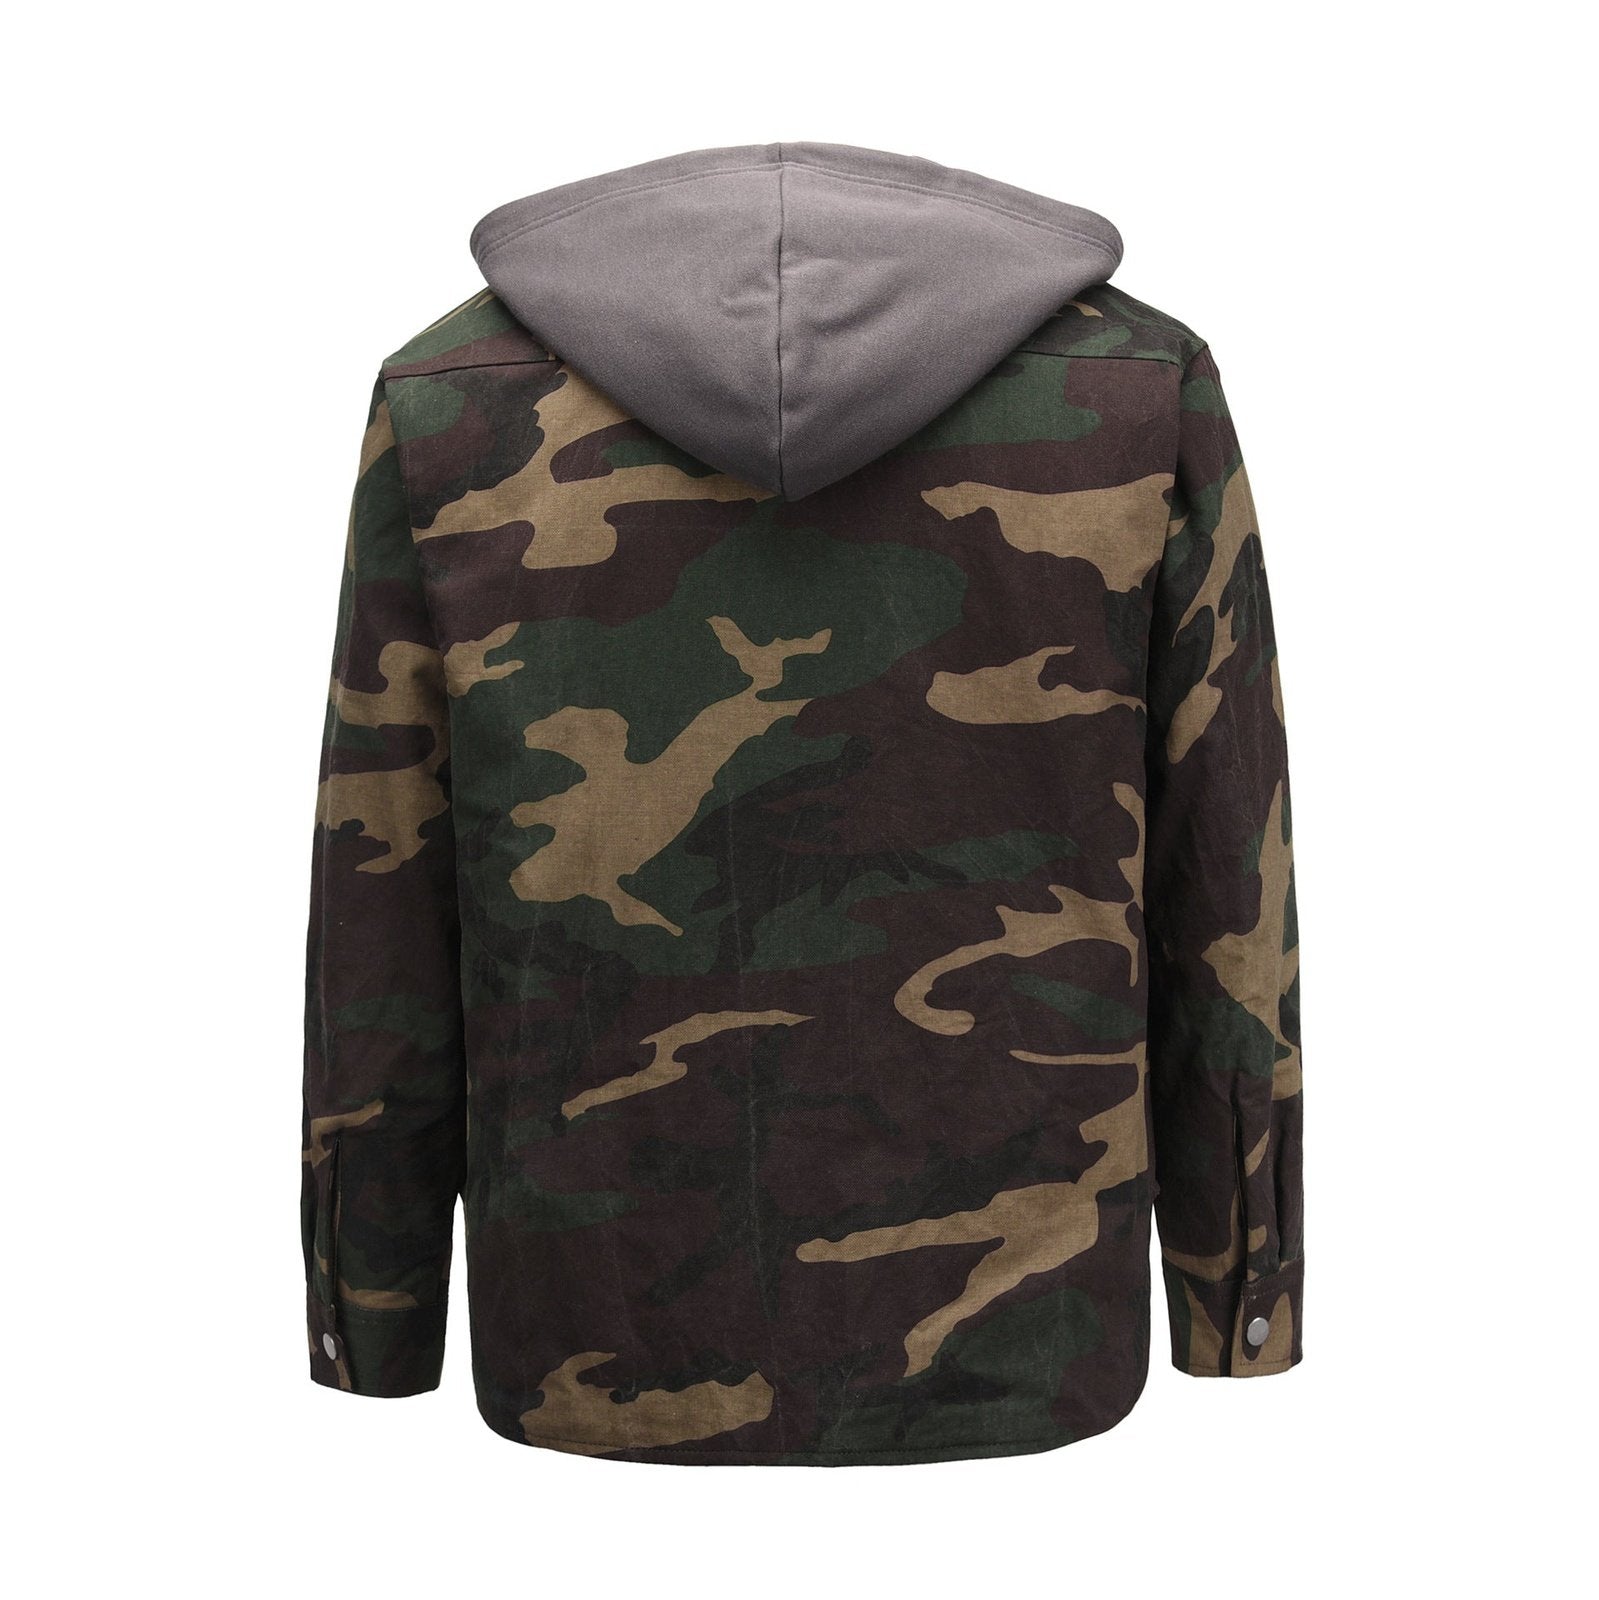  Military Matter Camouflage Printed Cotton Jacket Twill Hooded Jacket | The Best CS Tactical Clothing Store